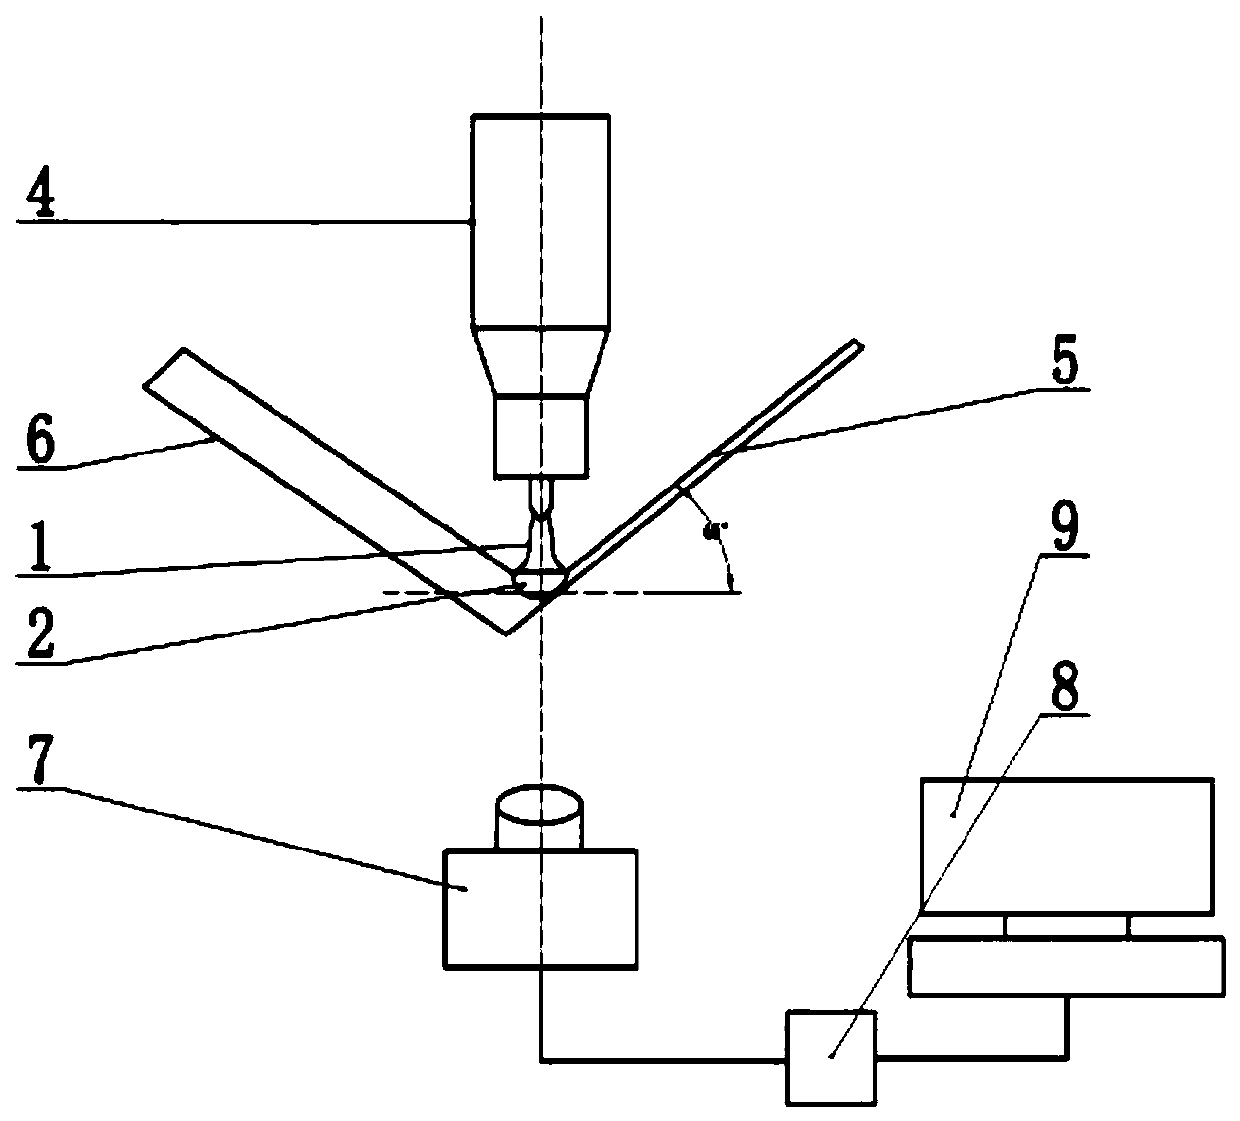 A Control Method of Penetration Shape and Penetration Depth of Asymmetric Fillet Weld